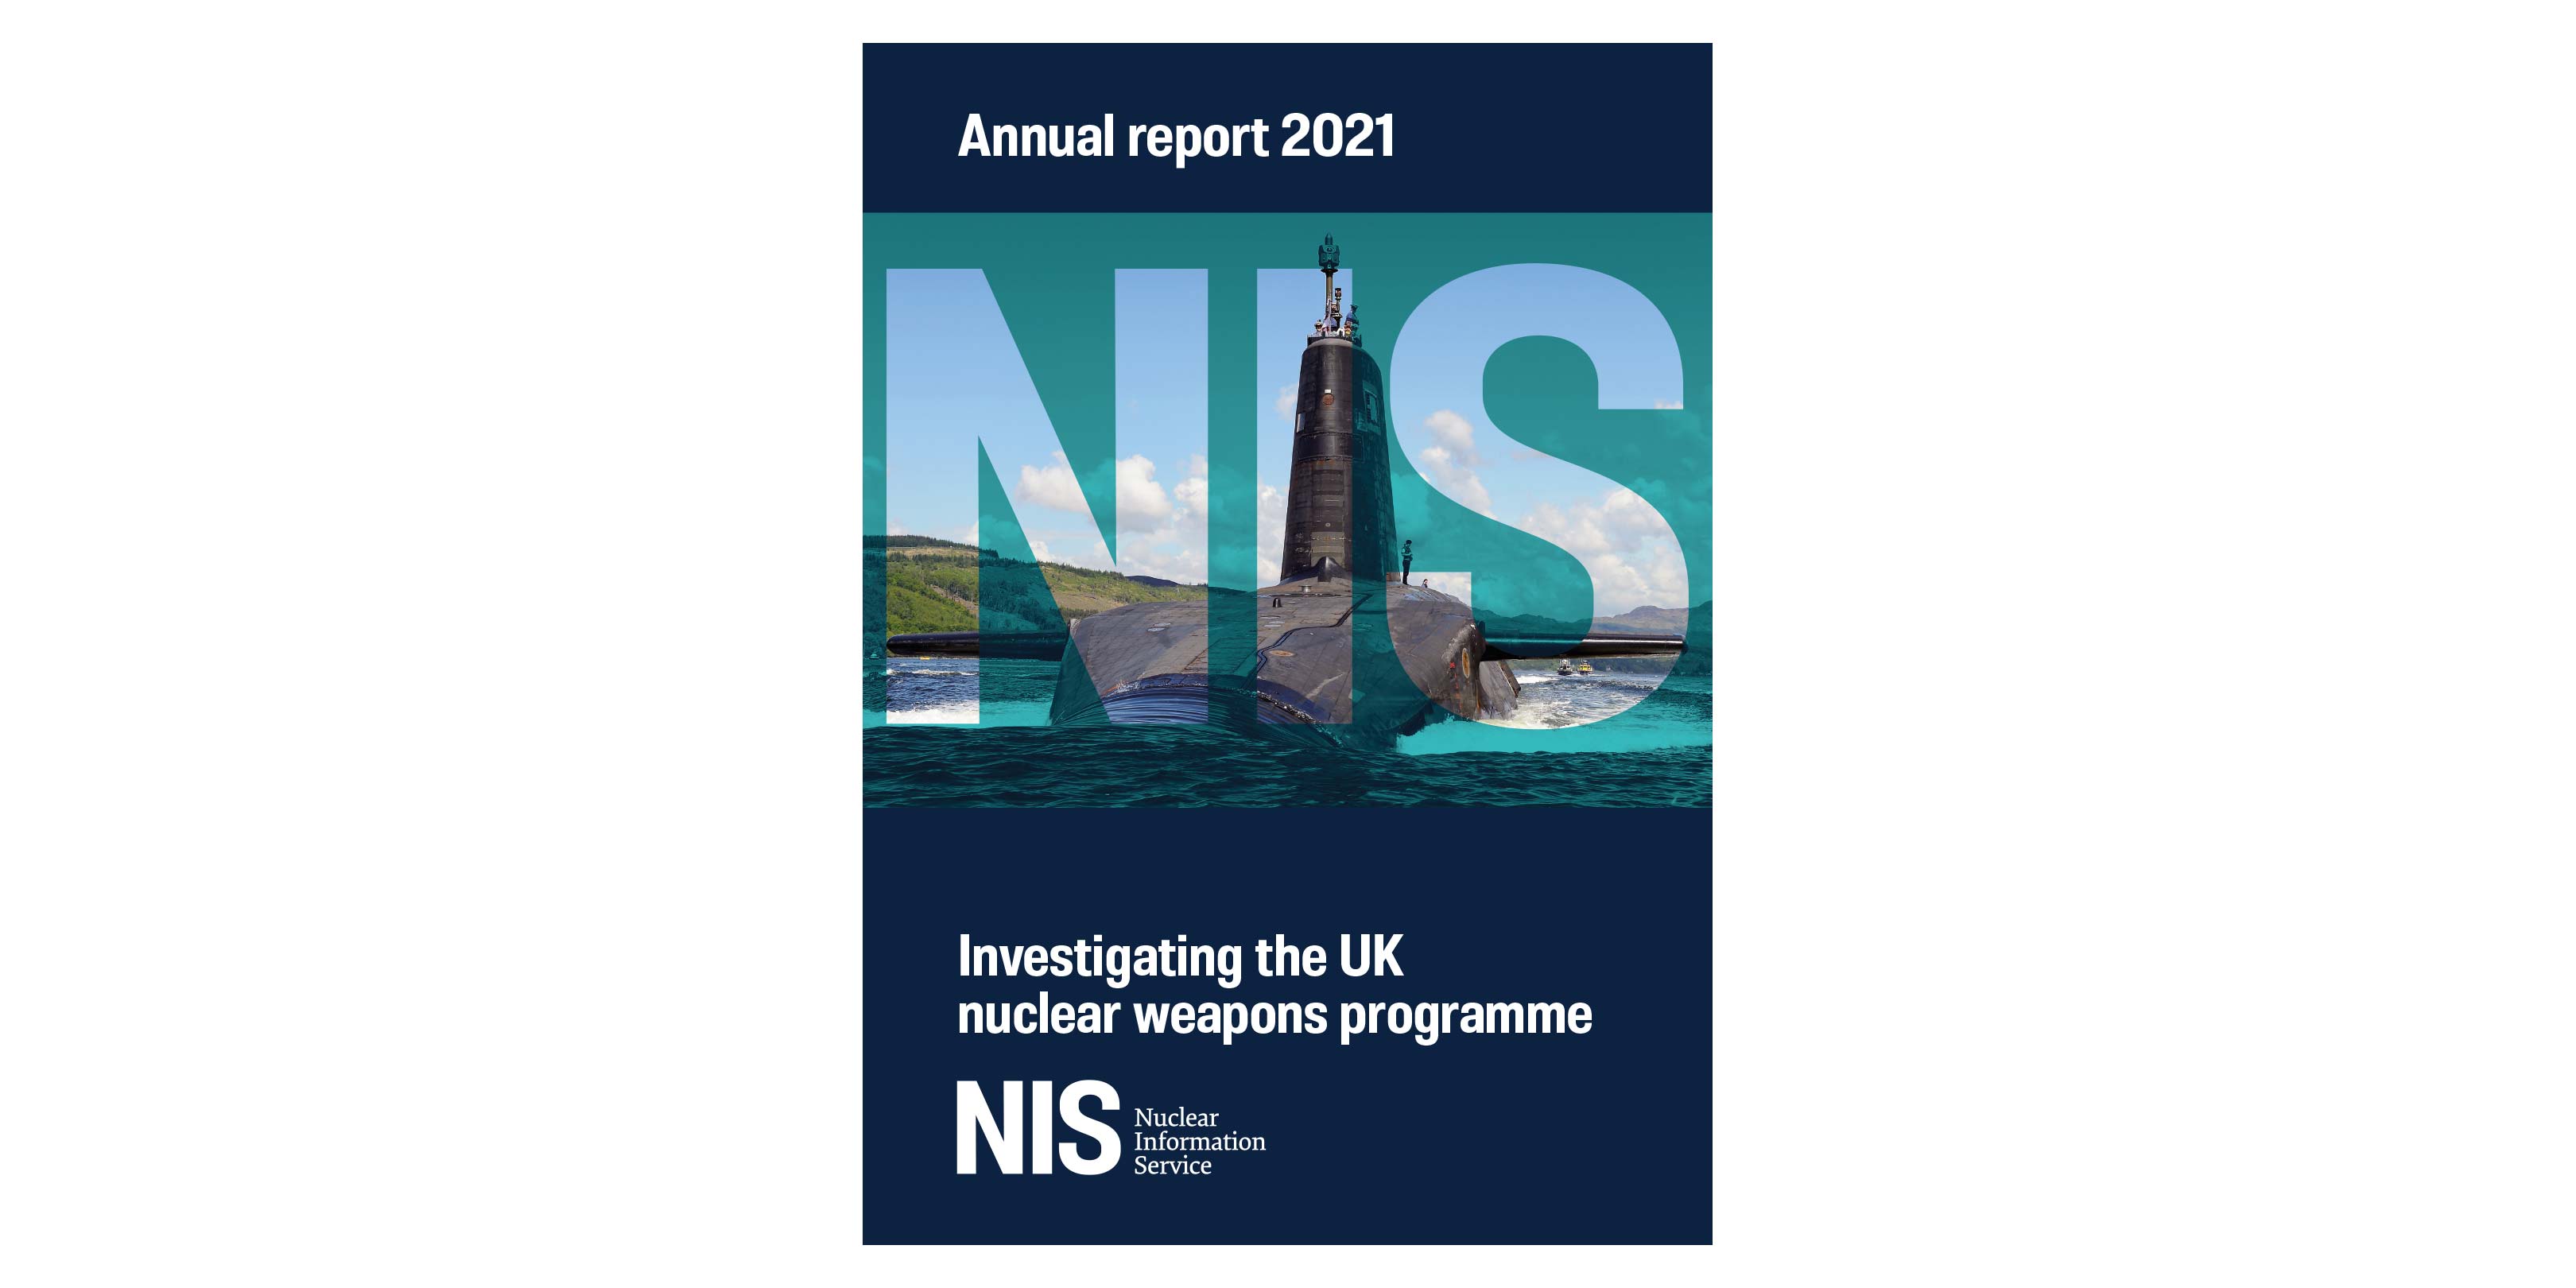 Nuclear Information Service annual report 2021